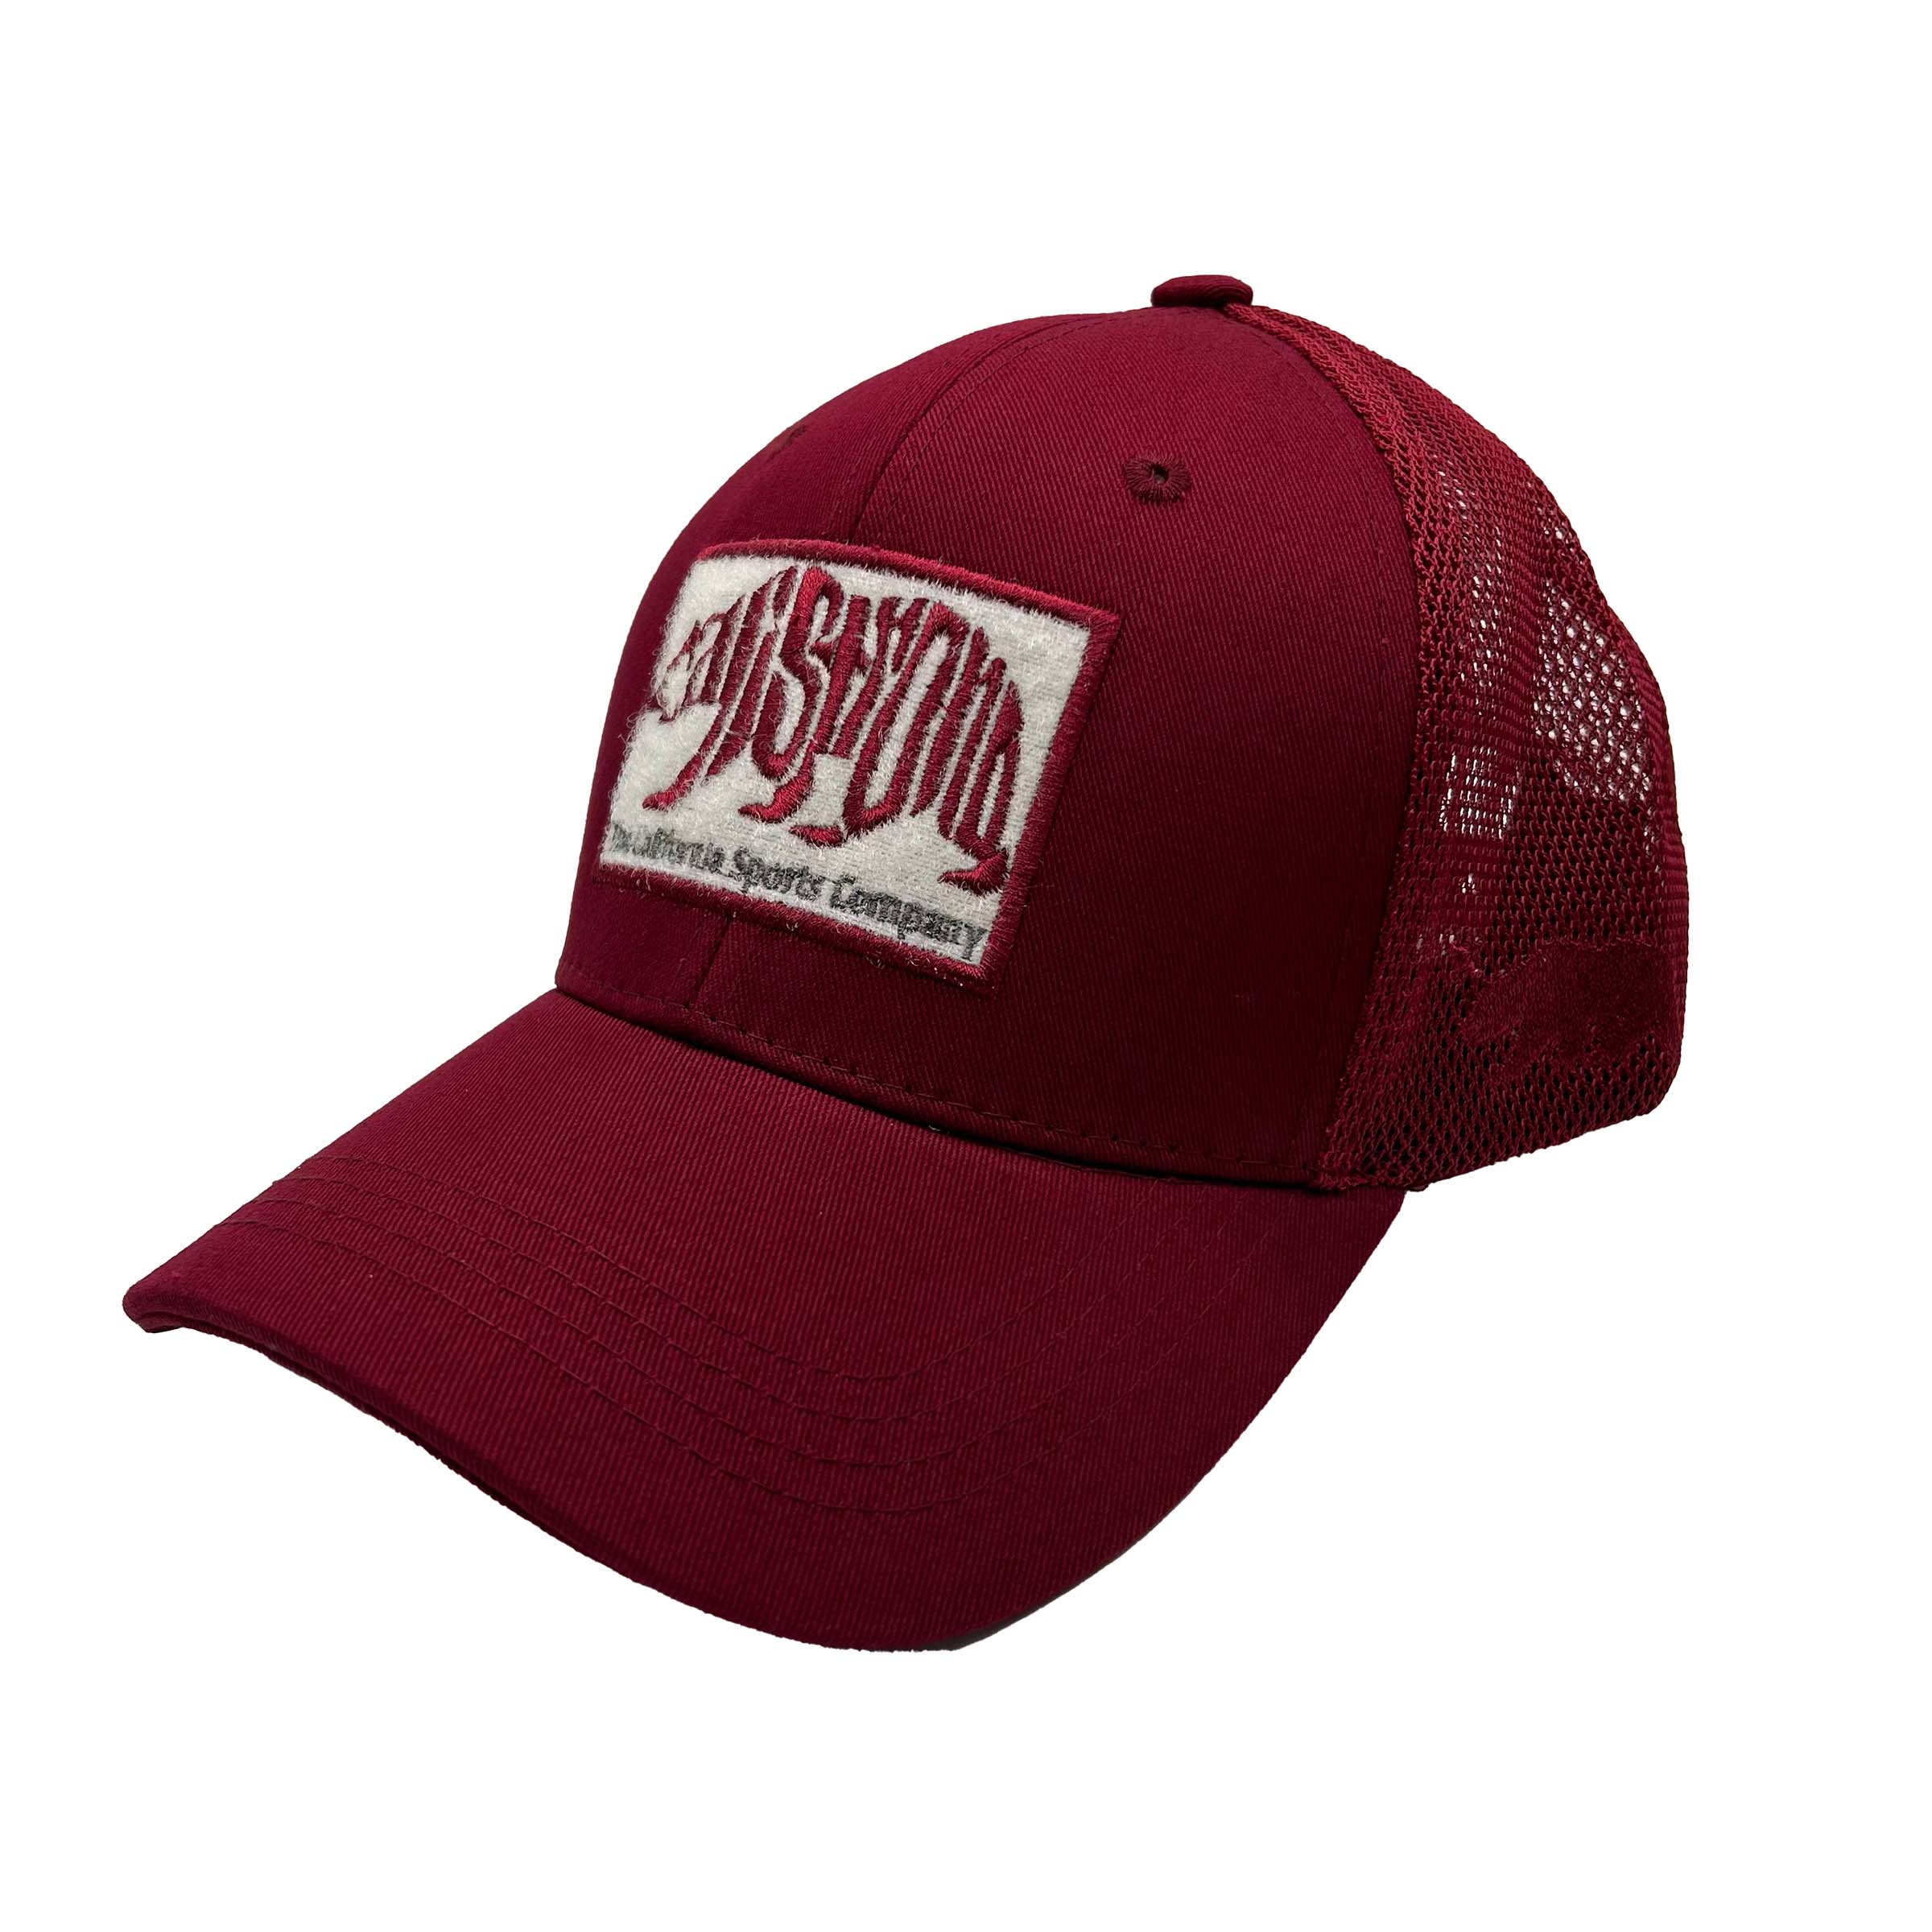 CALI Strong Original Tactical Trucker Hat Morale Patch Burgundy - Headwear - Image 2 - CALI Strong